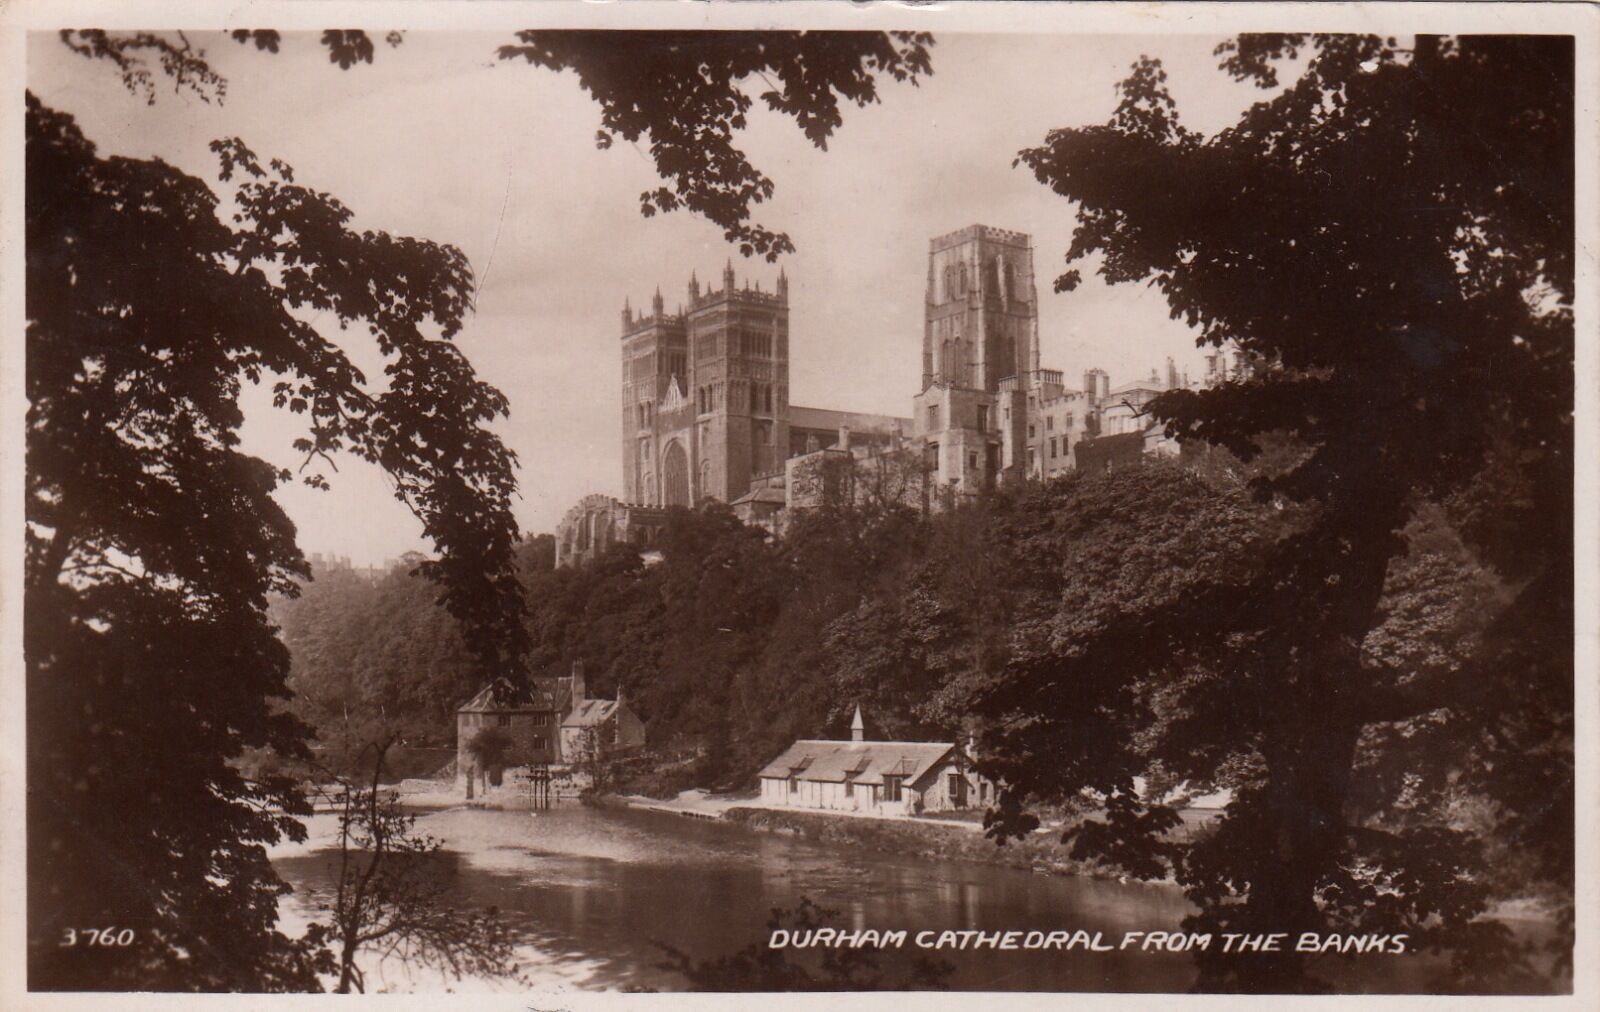 House Clearance - Durham Cathedral from the banks